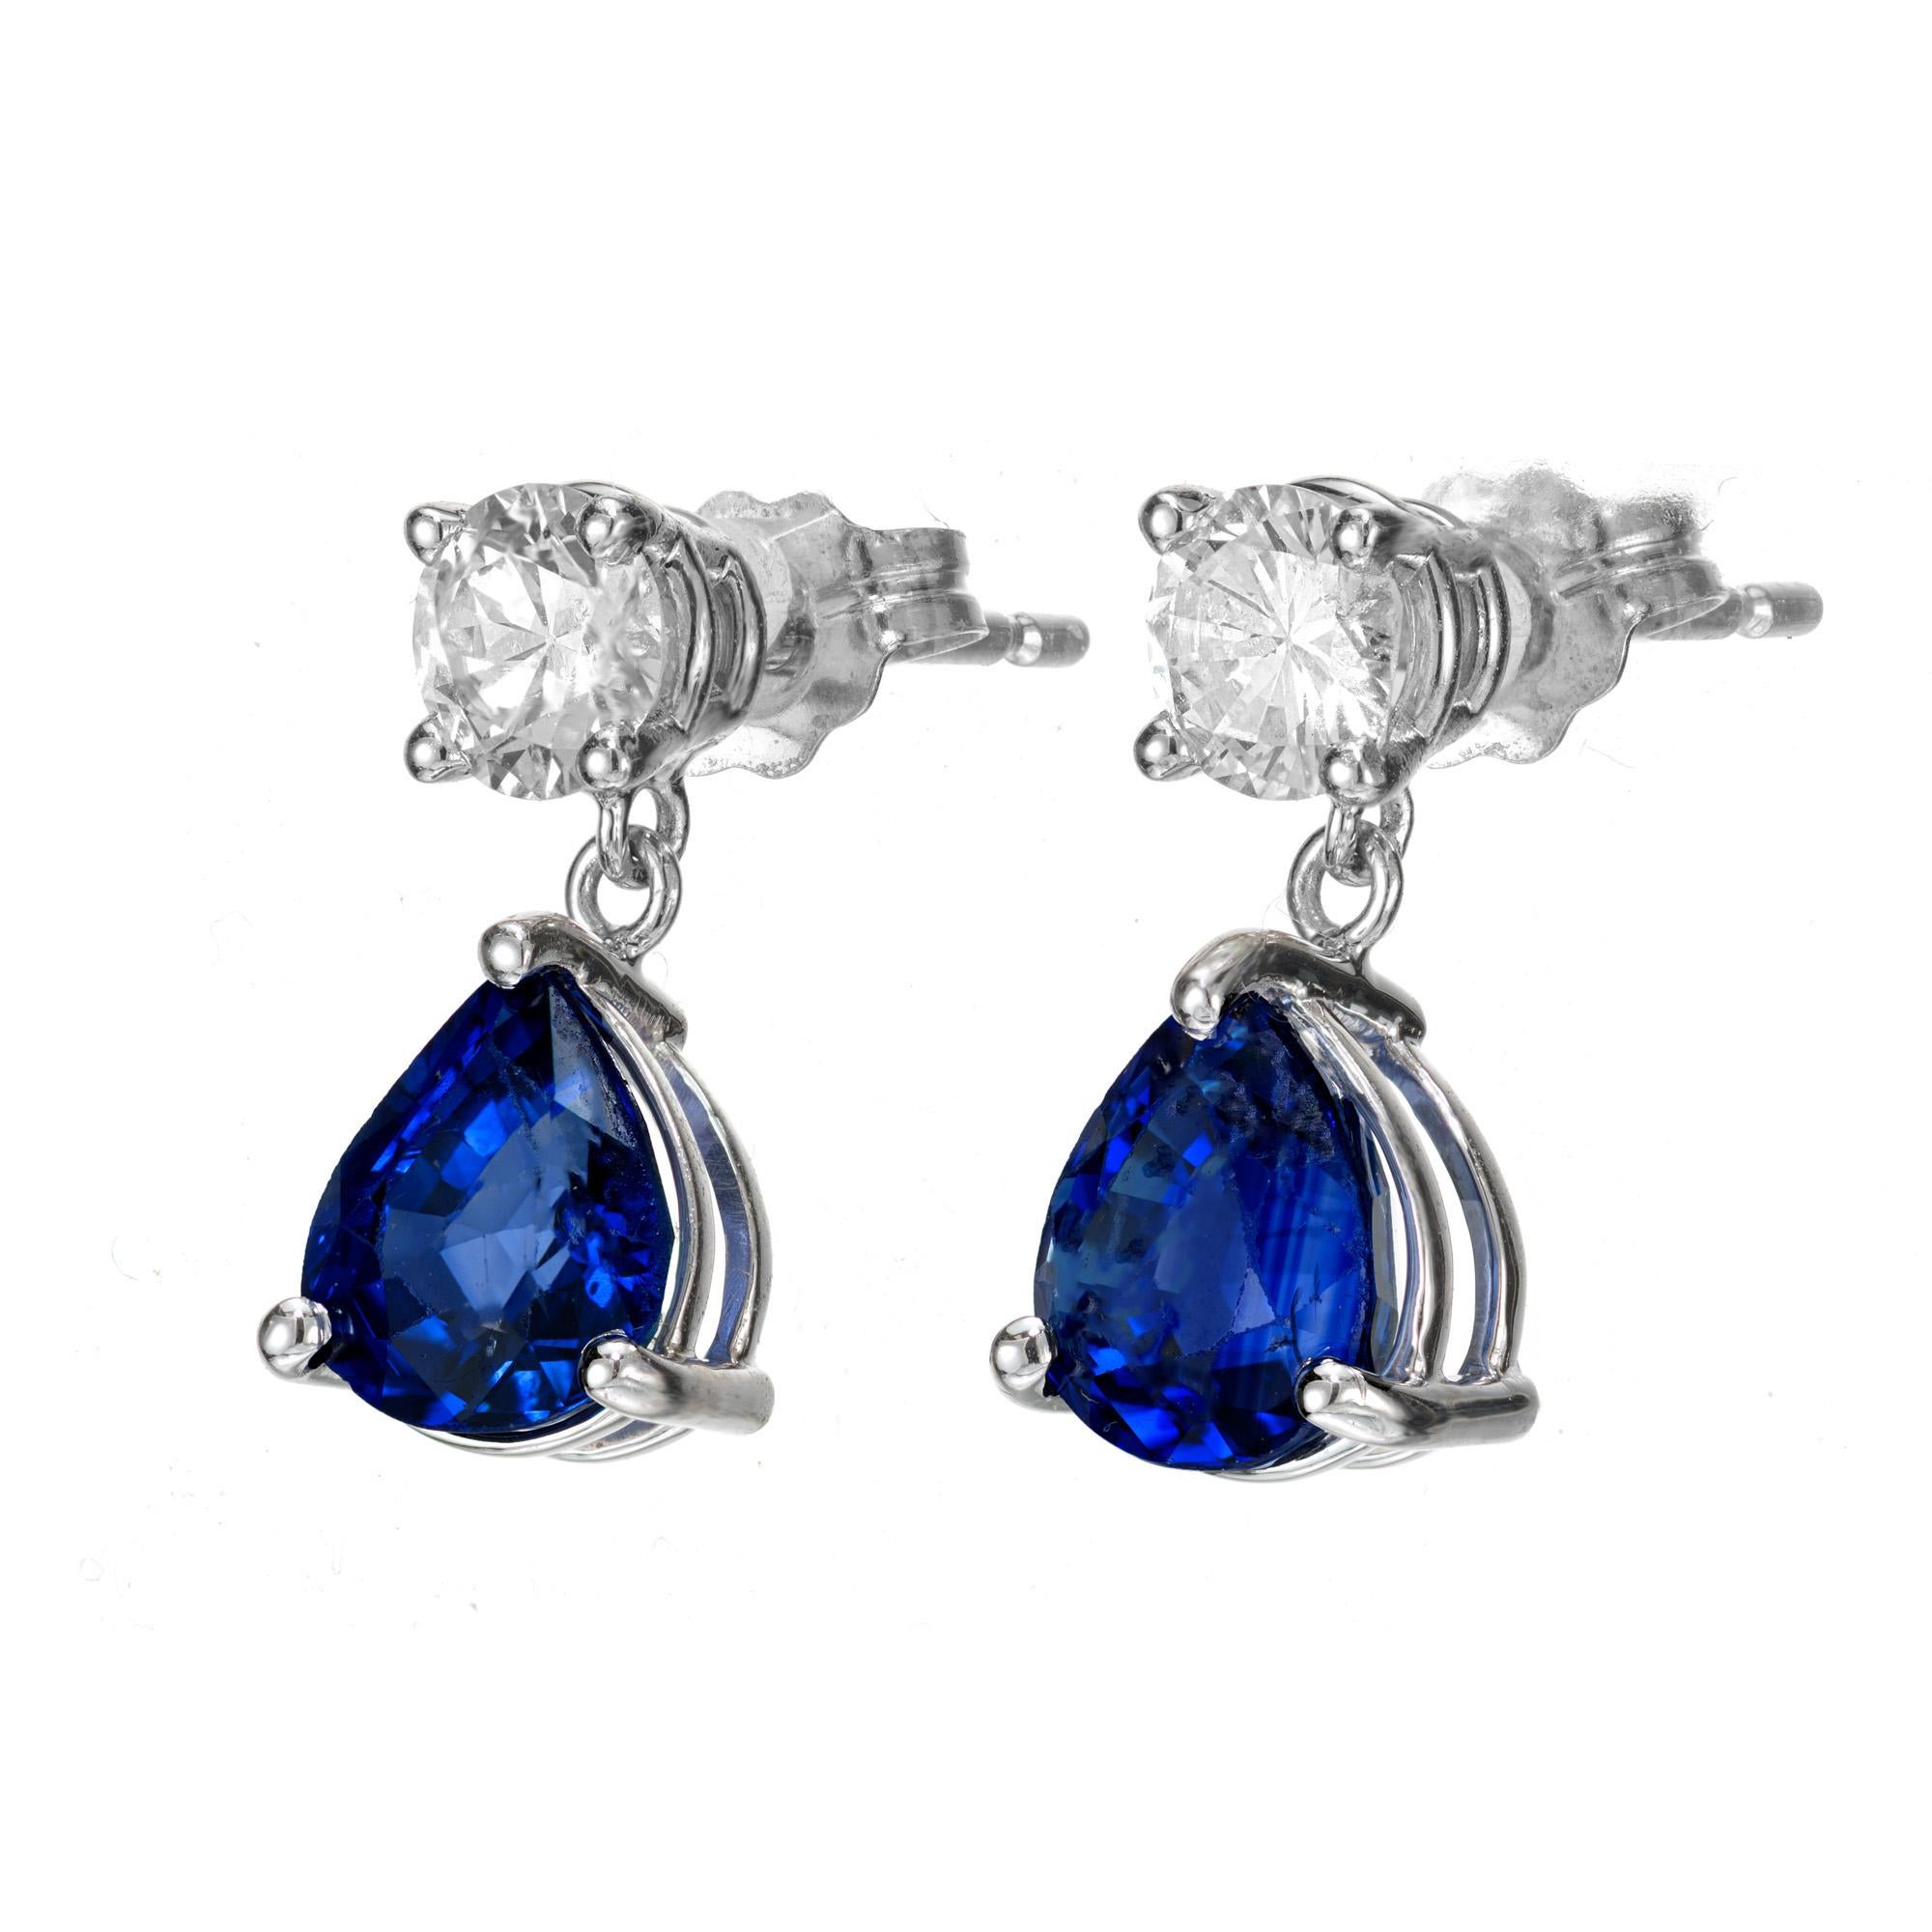 Sapphire and diamond earrings. GIA certified pear shaped sapphires, each dangling from a round shaped diamond in a 14k white gold setting. Designed crafted in the Peter Suchy Workshop. 

1 pear shape blue sapphire, SI approx. 1.20ct GIA certificate